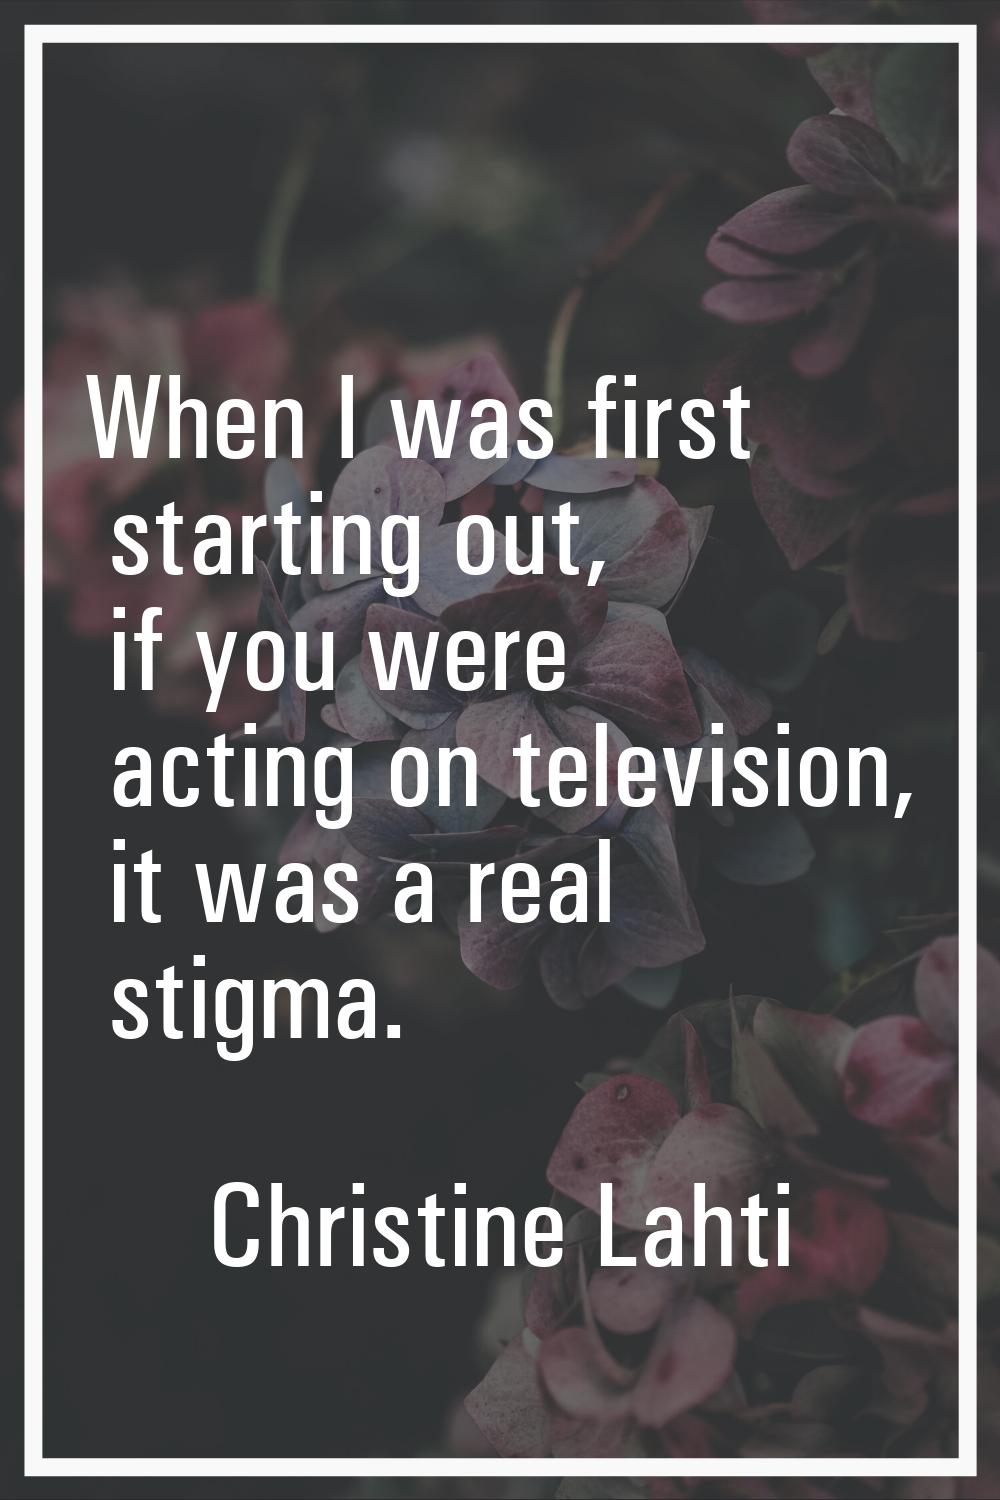 When I was first starting out, if you were acting on television, it was a real stigma.